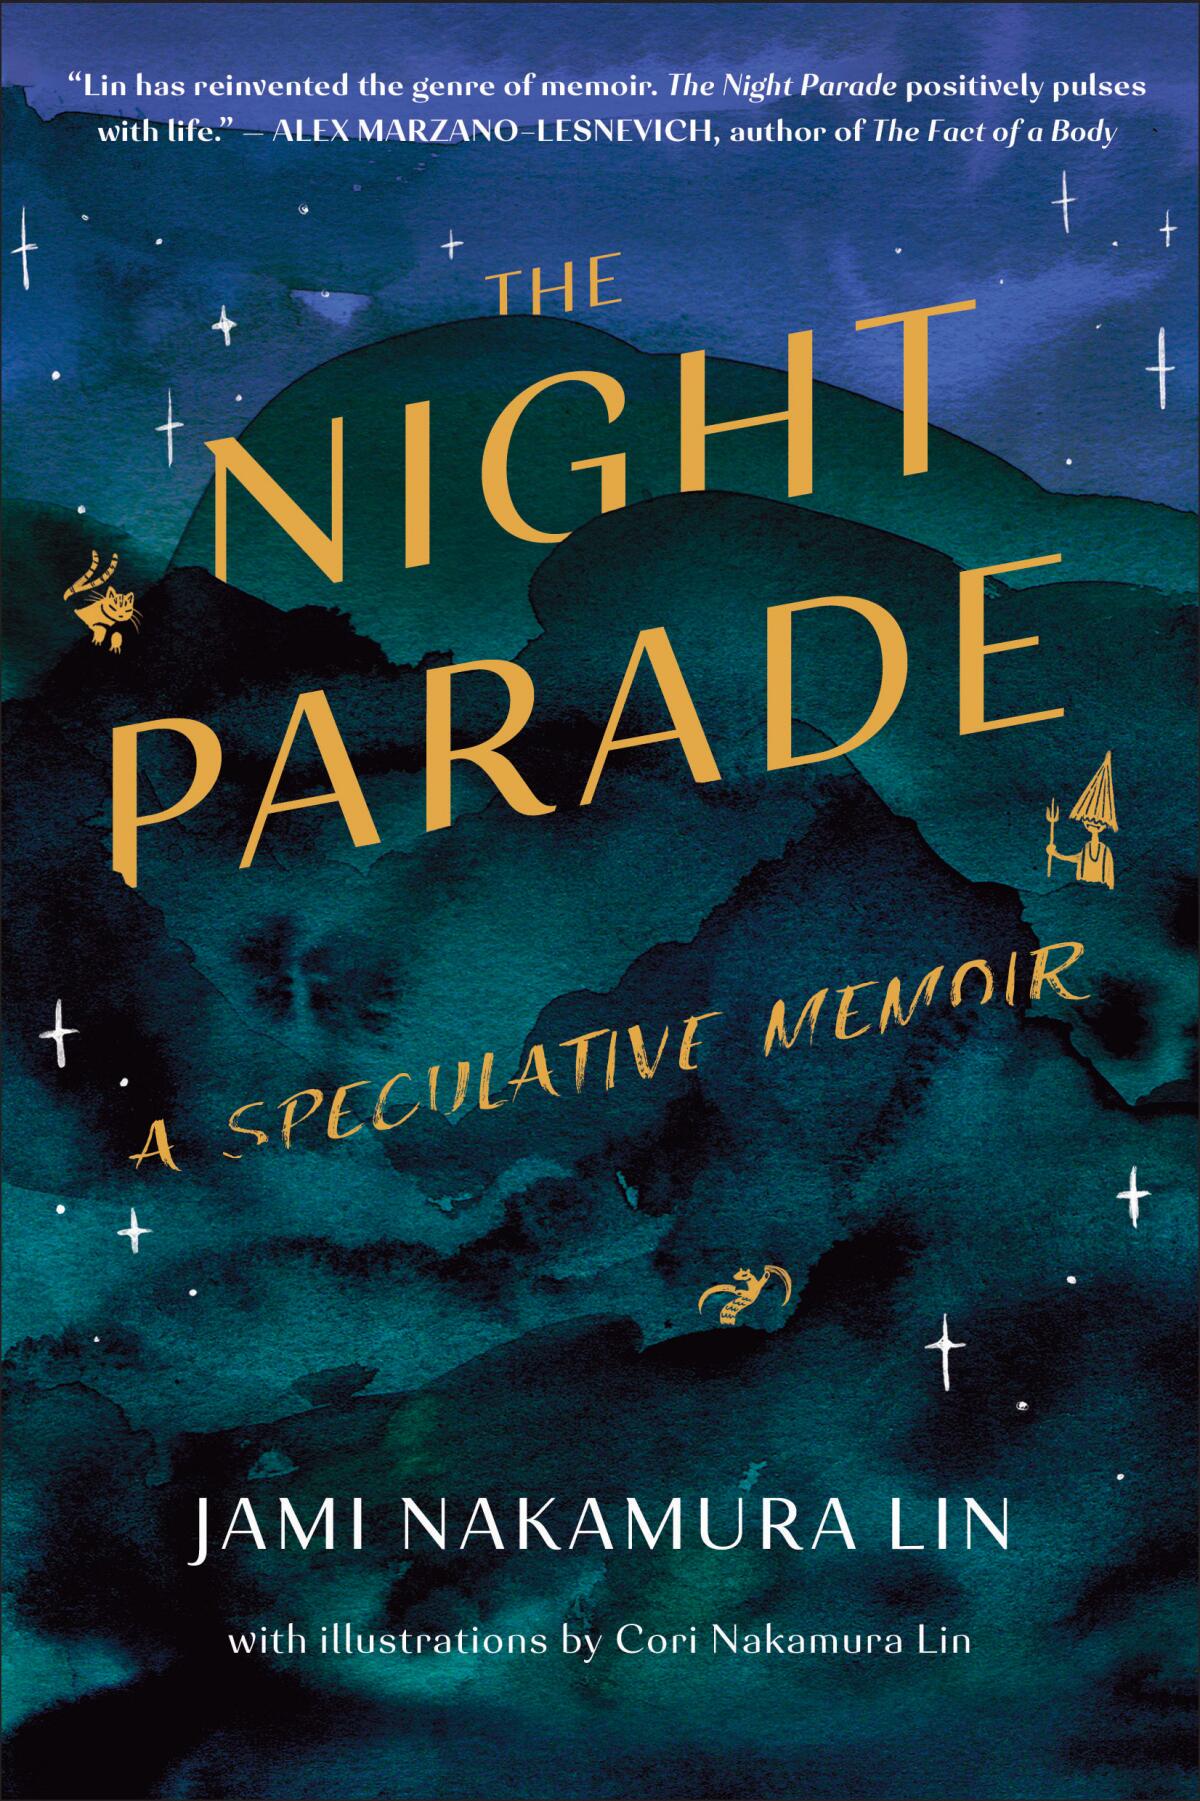 The cover of the book "The Night Parade," by Jami Nakamura Lin, with green mountains under a blue night sky